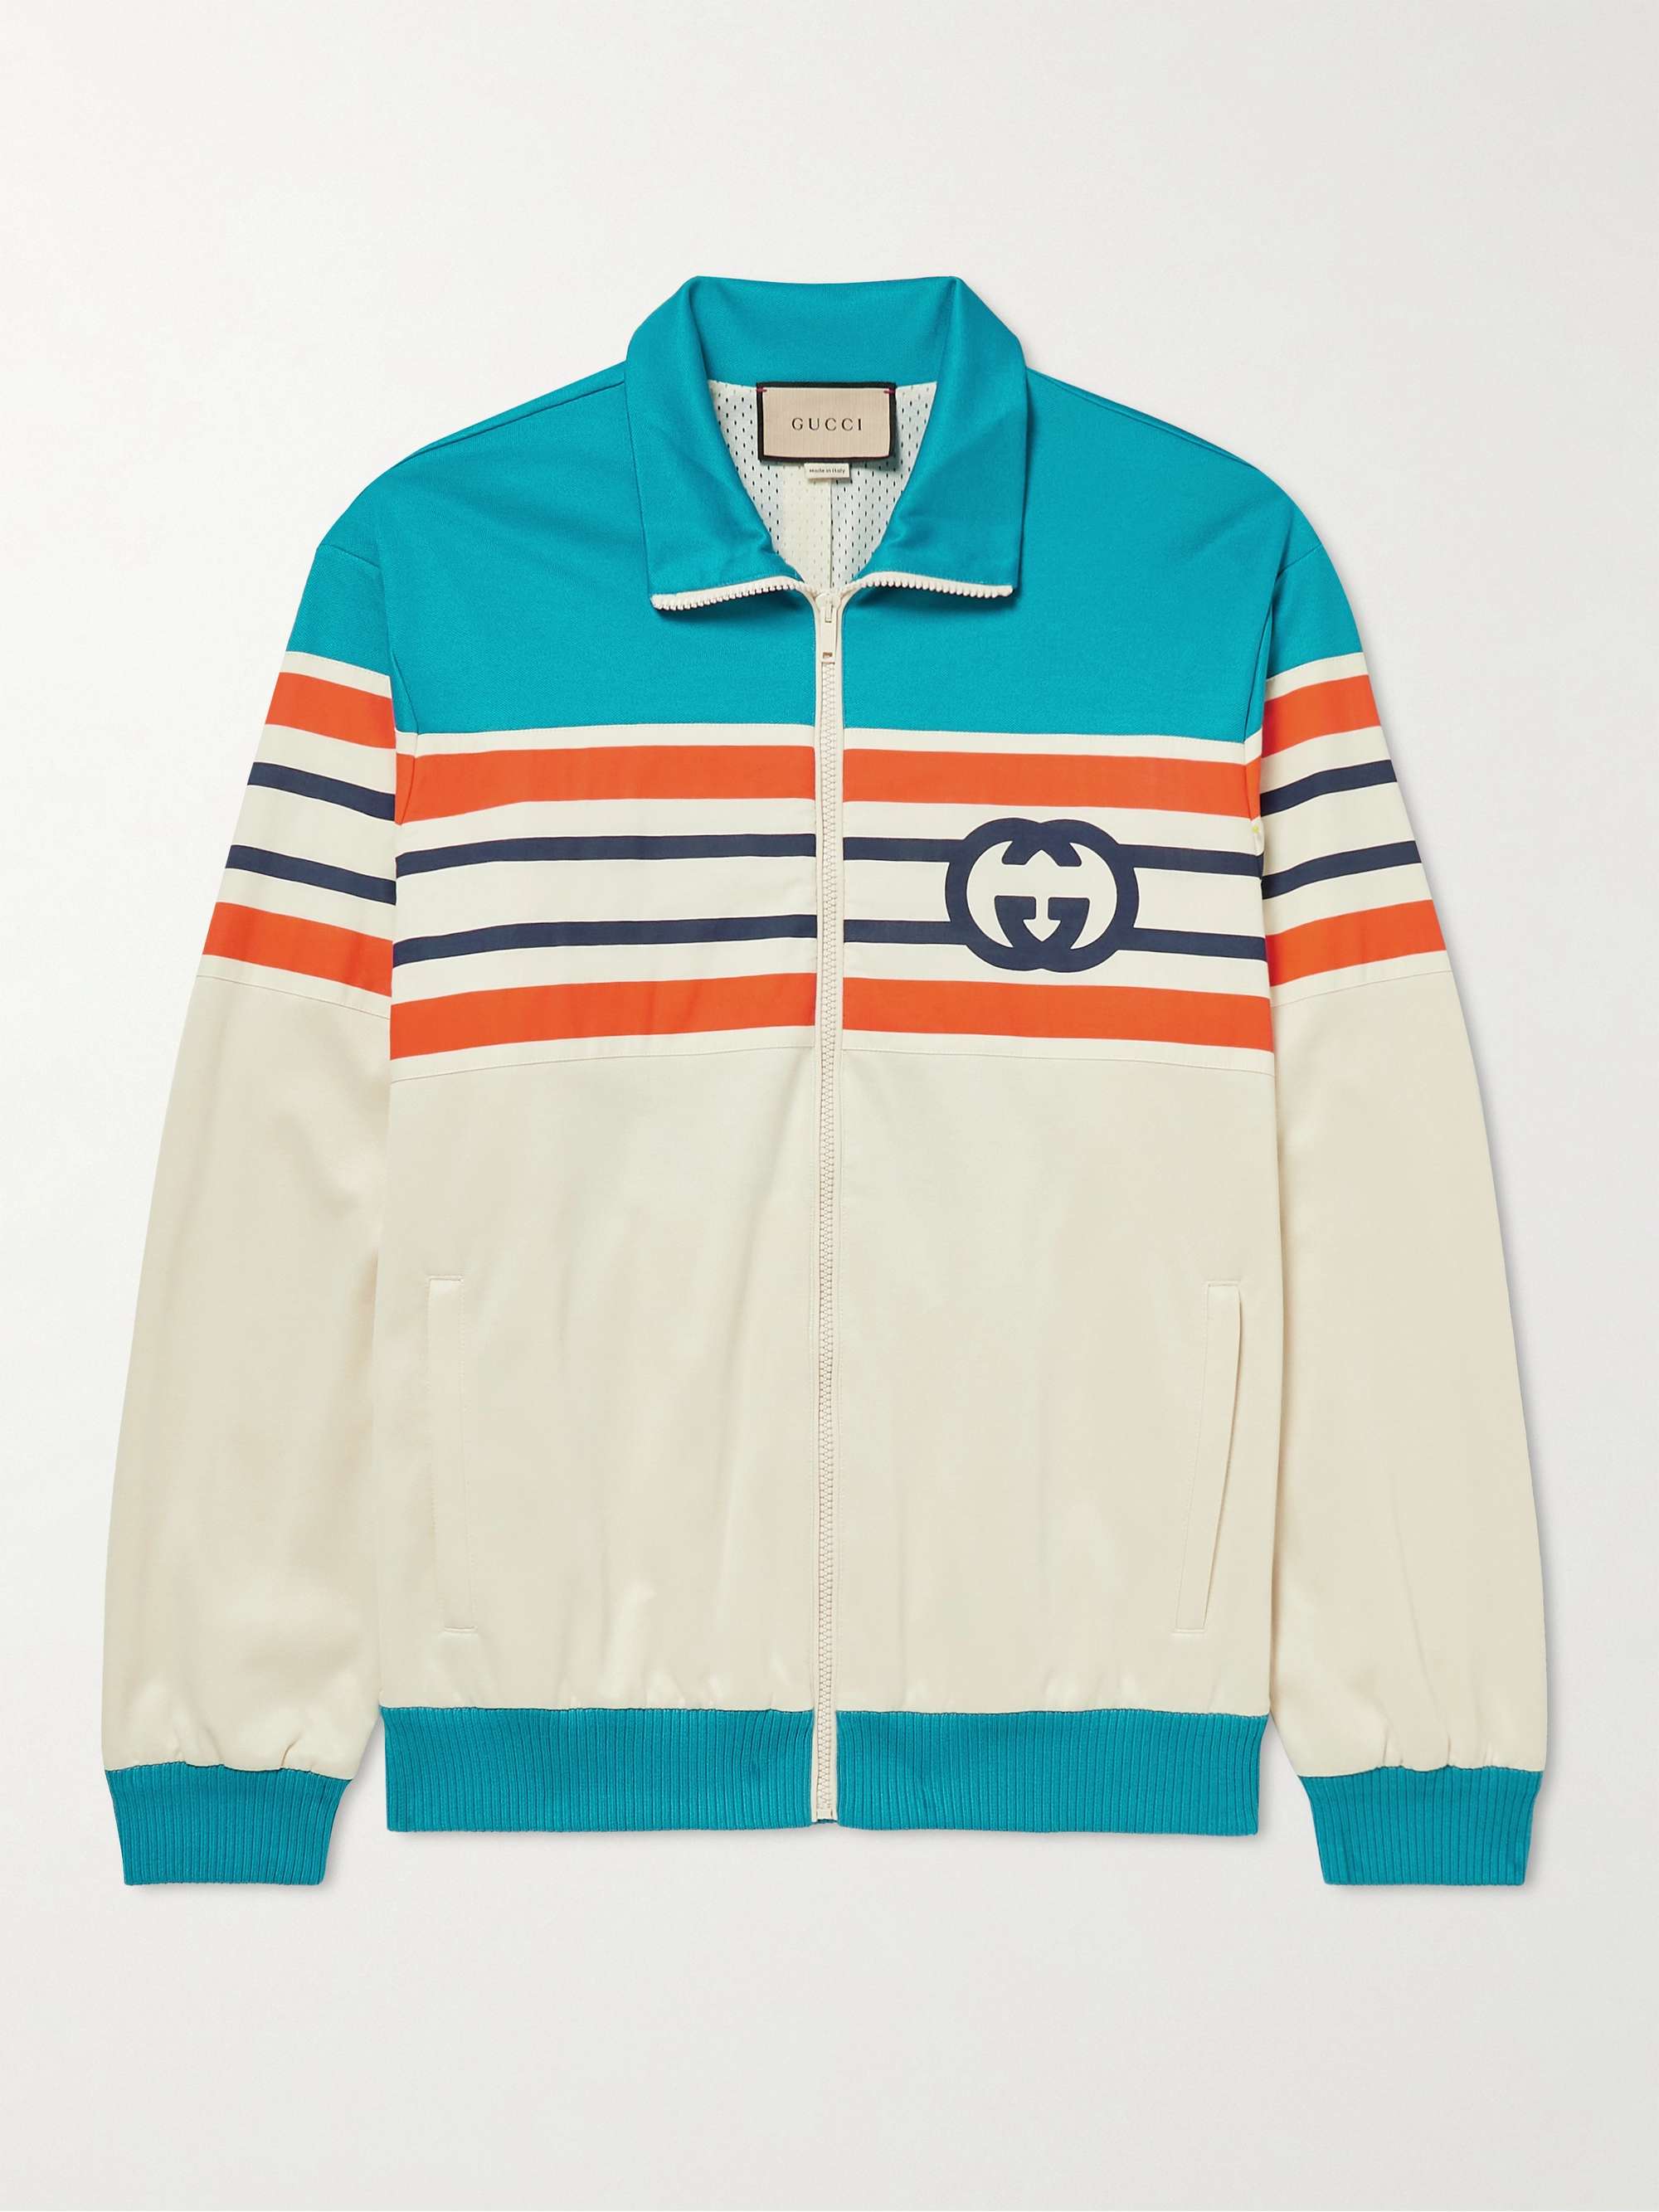 GUCCI Striped Canvas-Trimmed Tech-Jersey Track Jacket